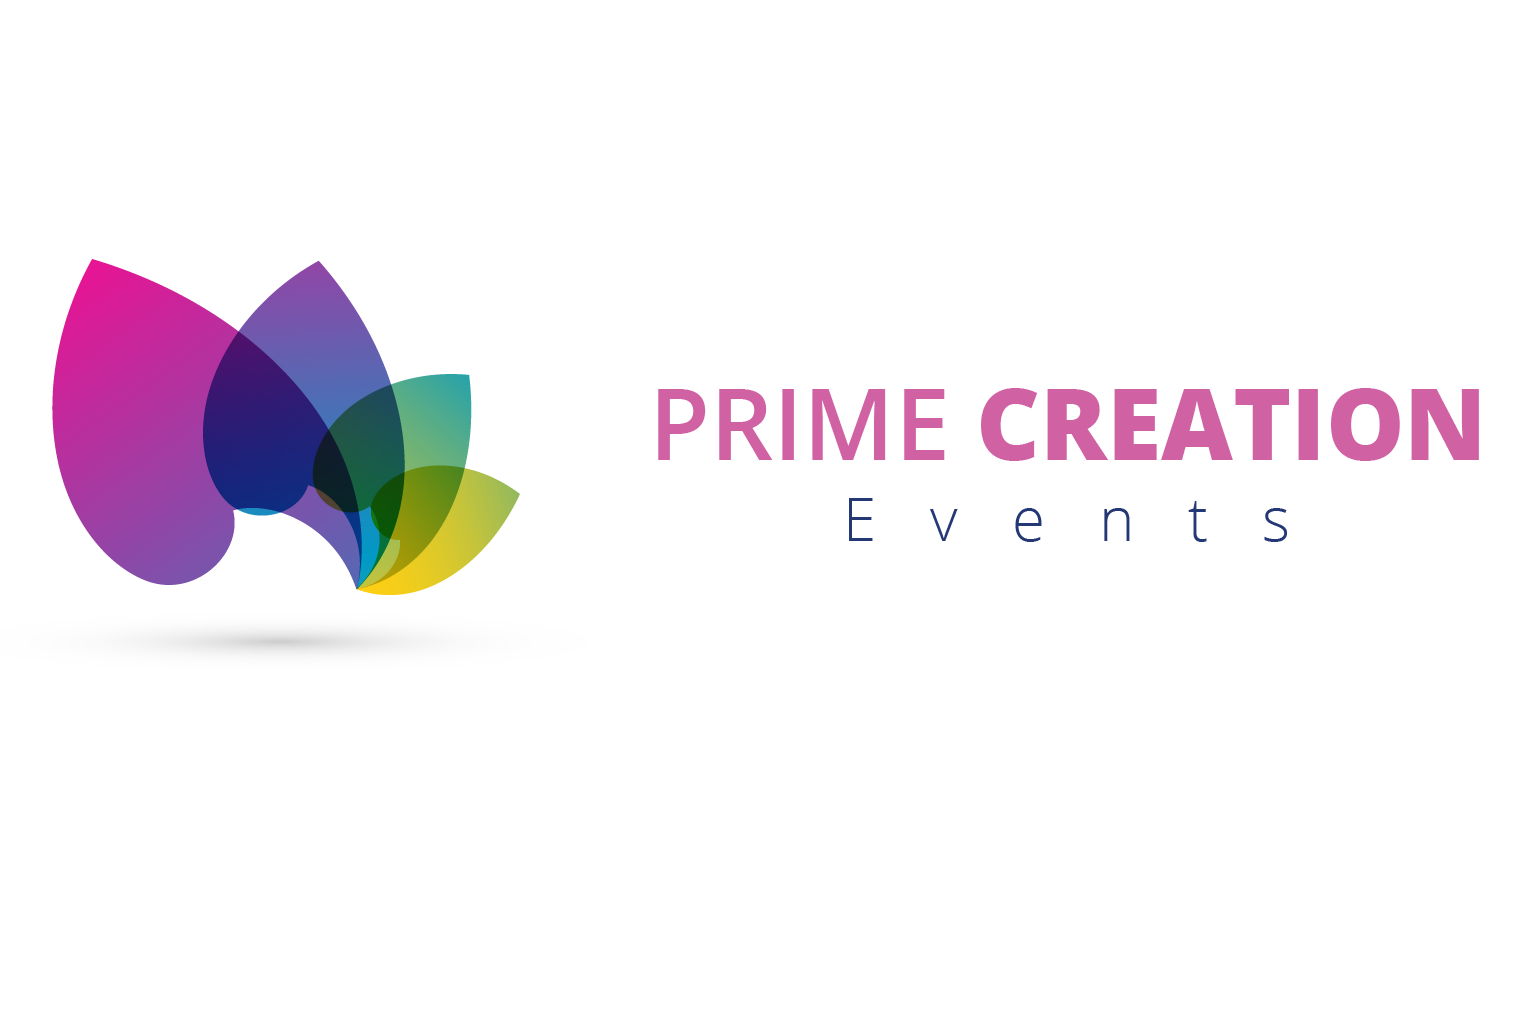 PRIME CREATION EVENTS